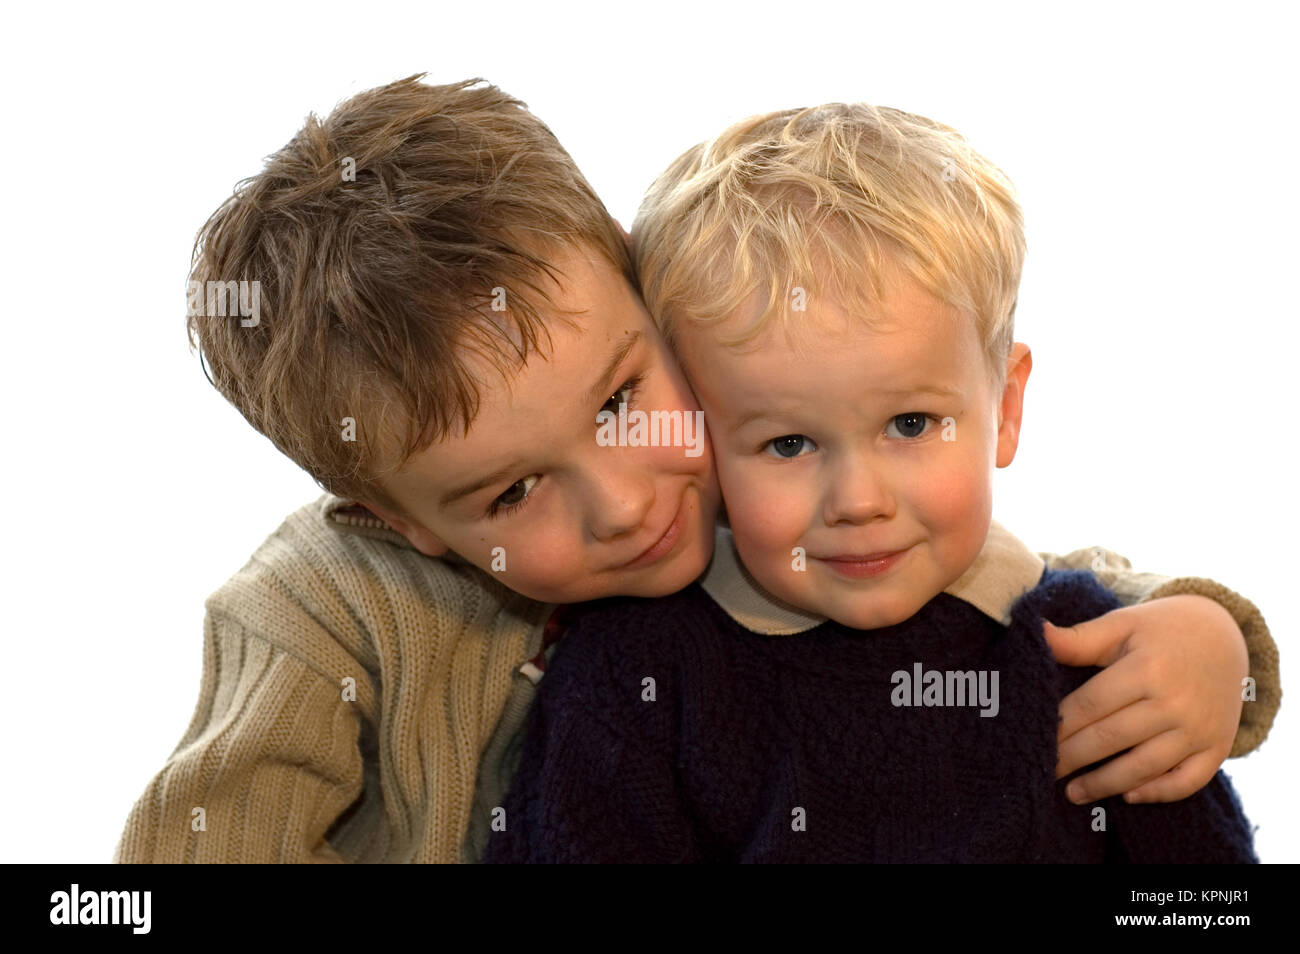 Two lovely brothers, 5 and 2 years of age. On white background. Stock Photo